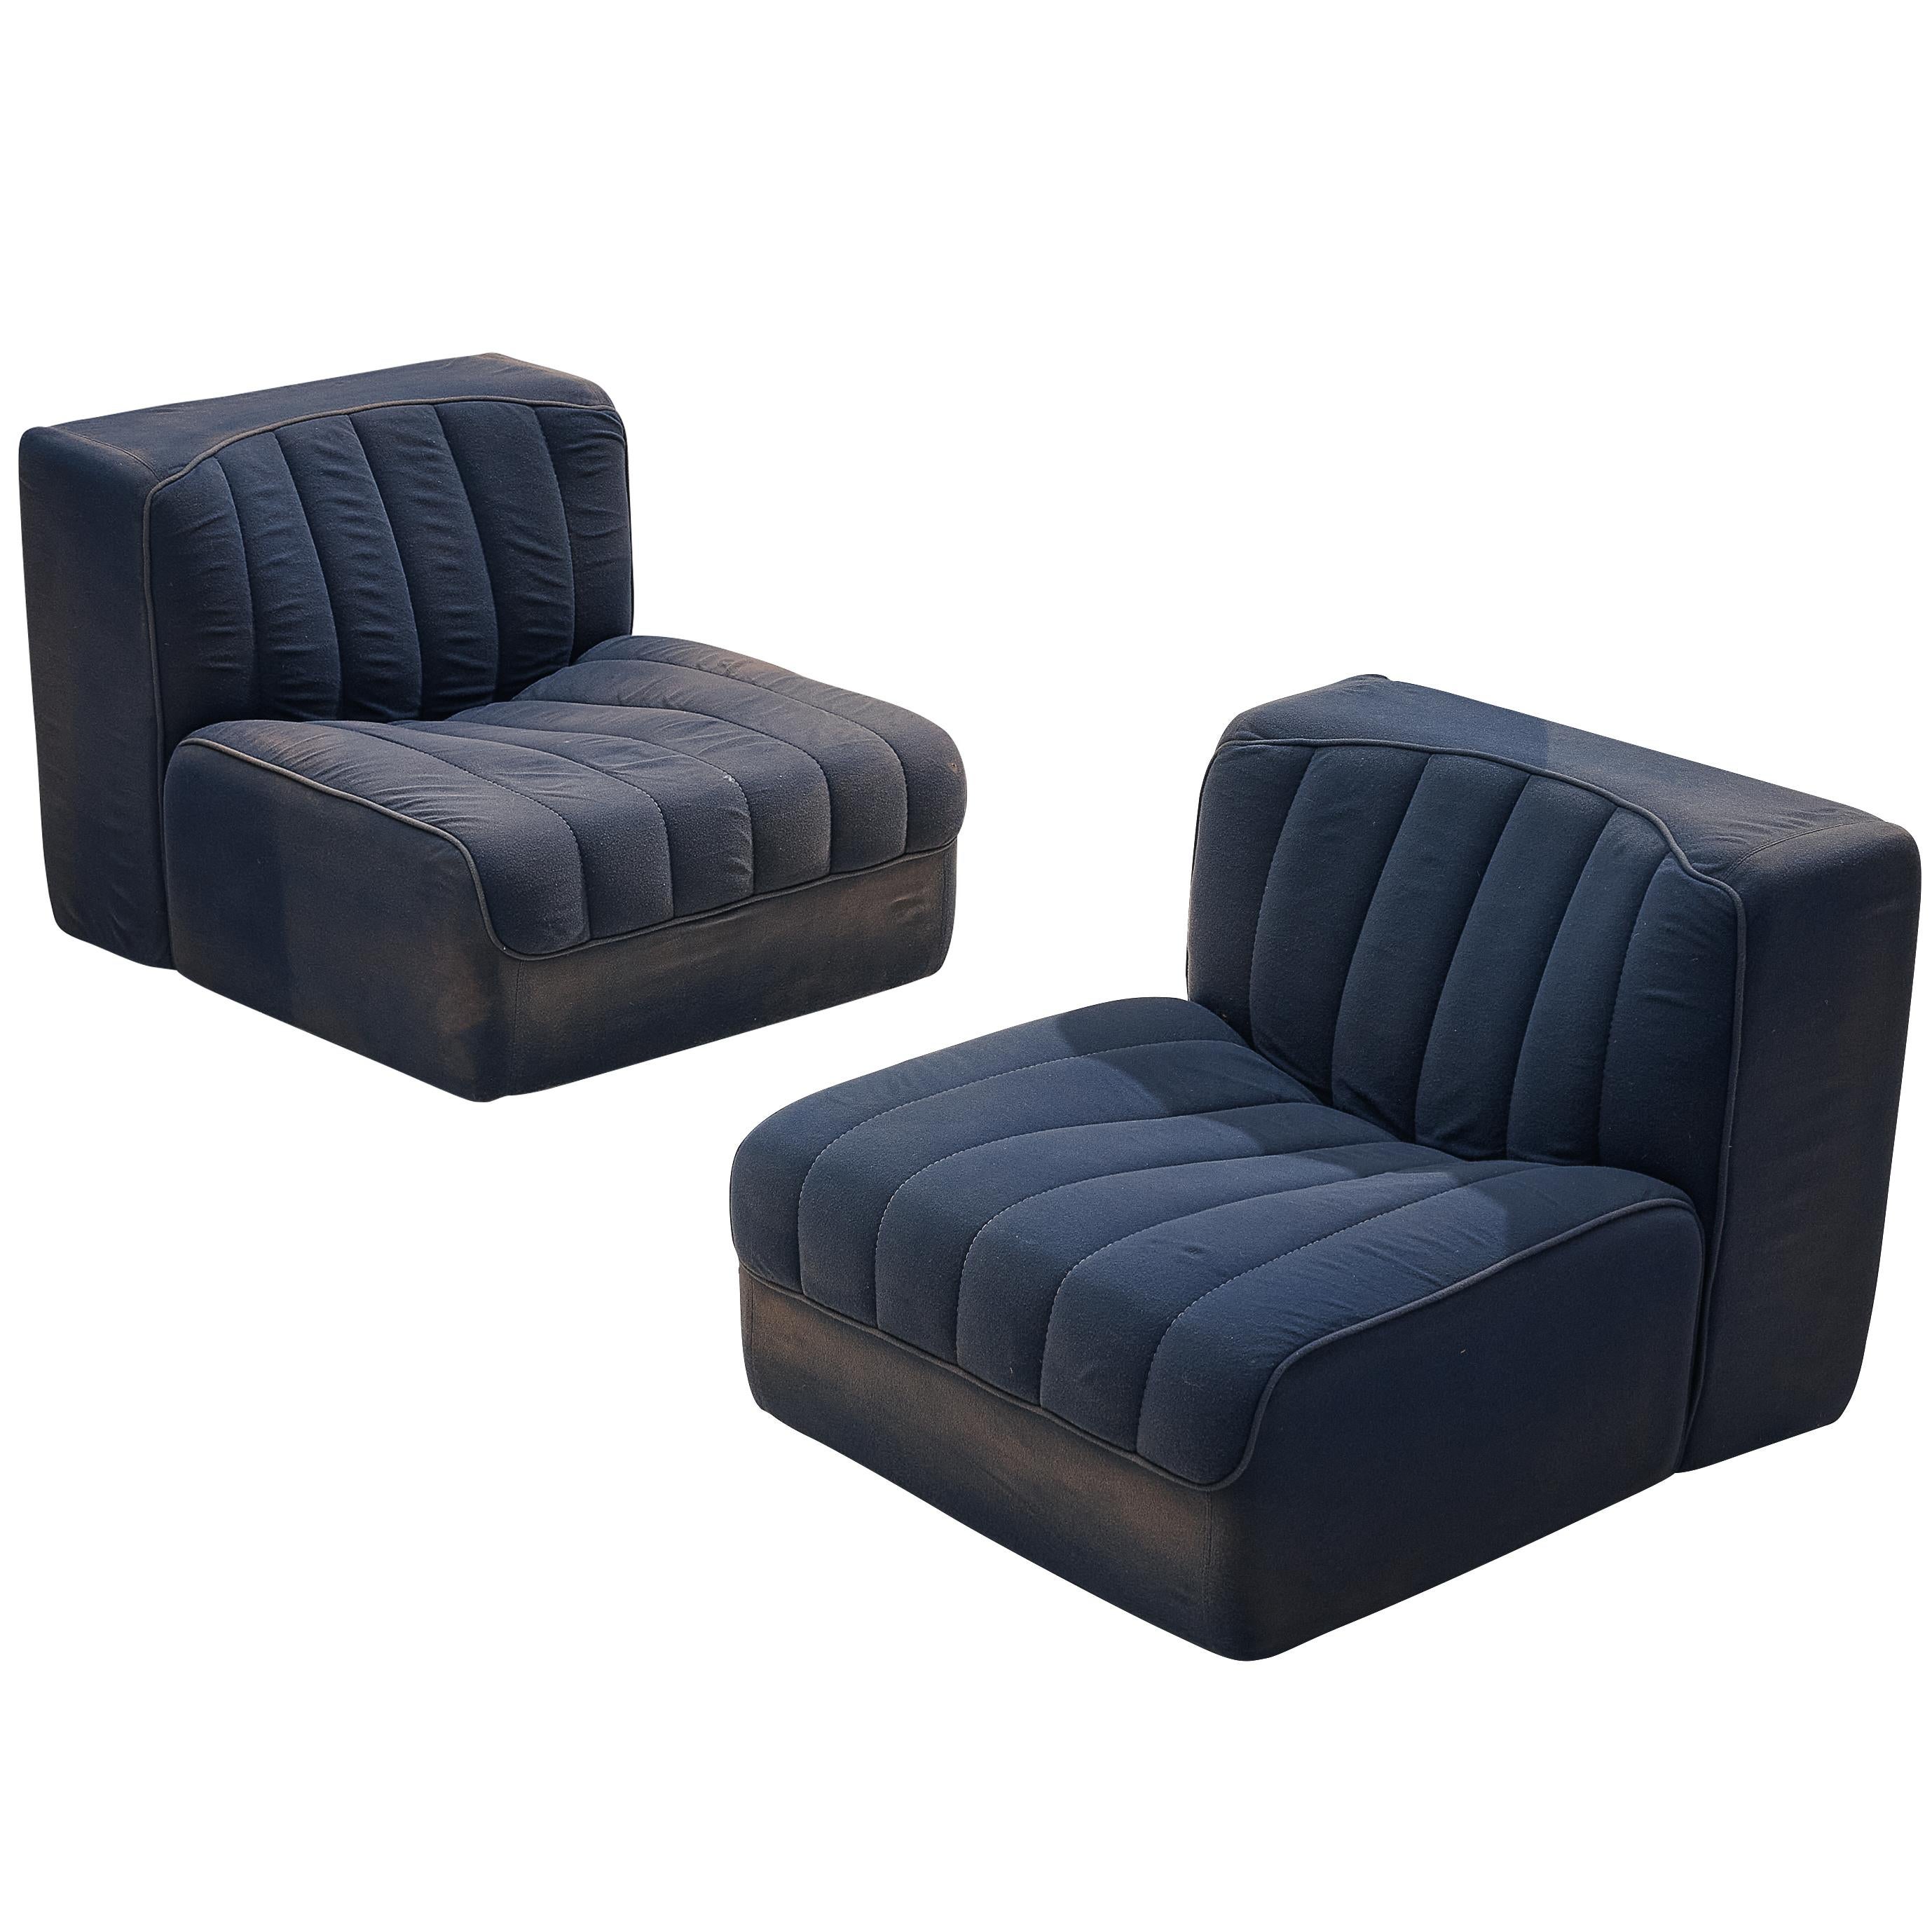 Tito Agnoli for Arflex Modular Lounge Chairs Model '9000' in Blue Upholstery